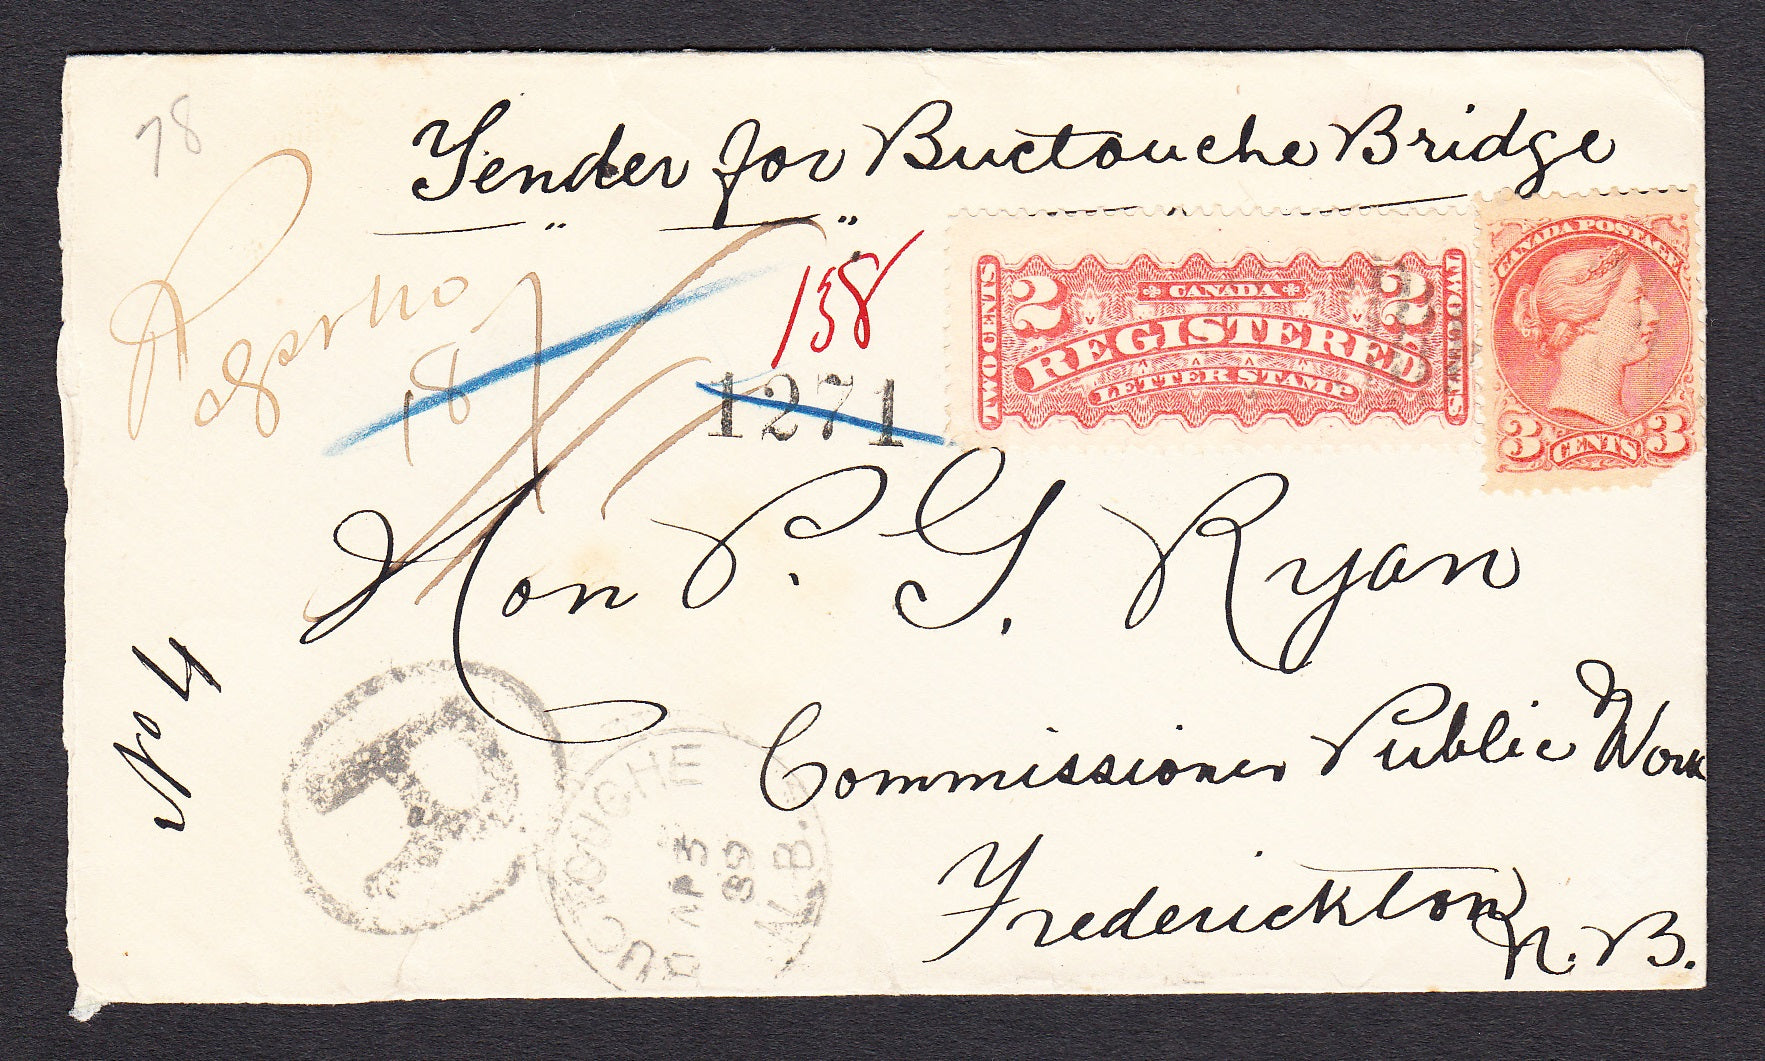 0037NB1709 - #37 & F1 on 'Buctouche', N.B. Registered Cover